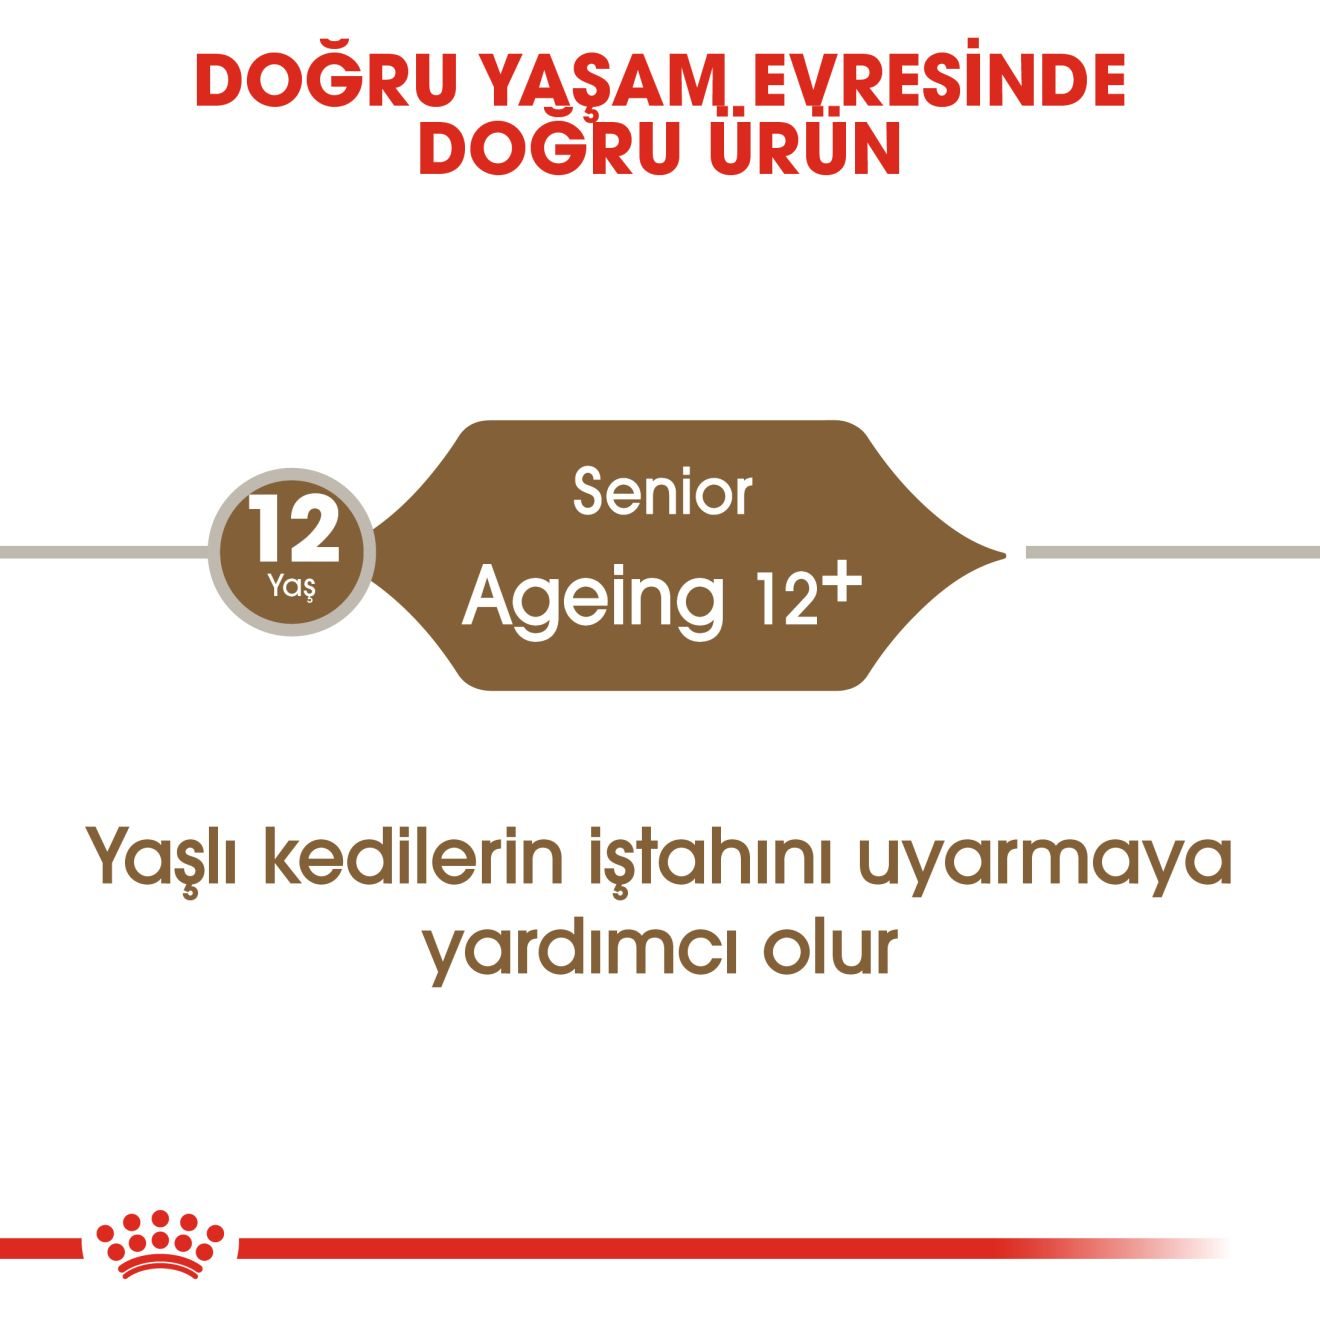 Ageing 12+